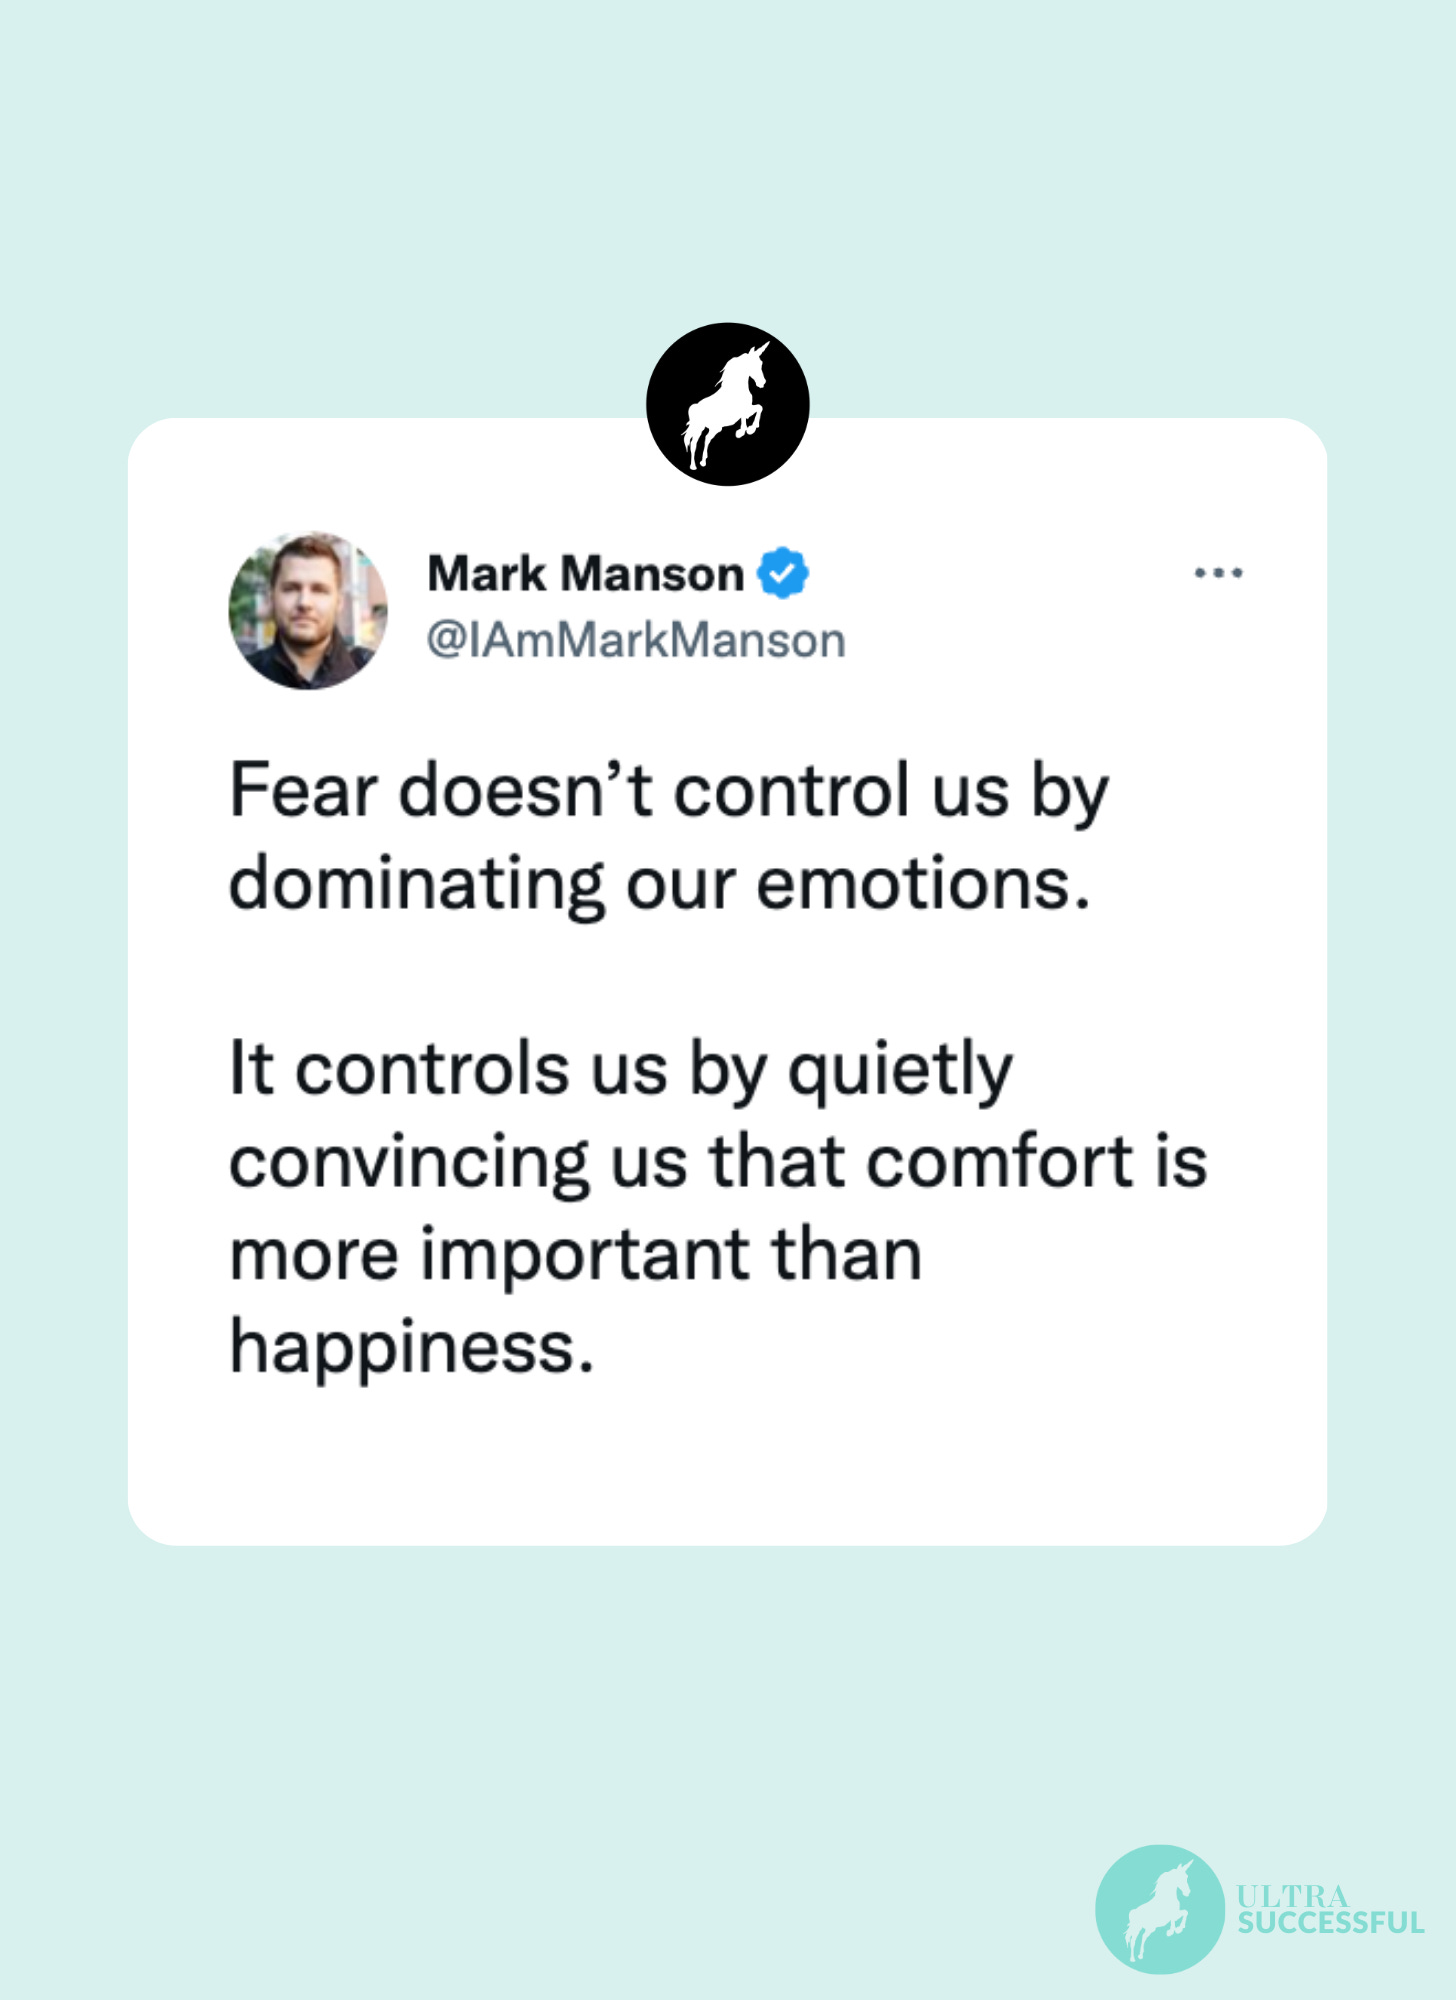 @IAmMarkManson: Fear doesn't control us by dominating our emotions. It controls us by quietly convincing us that comfort is more important than happiness.